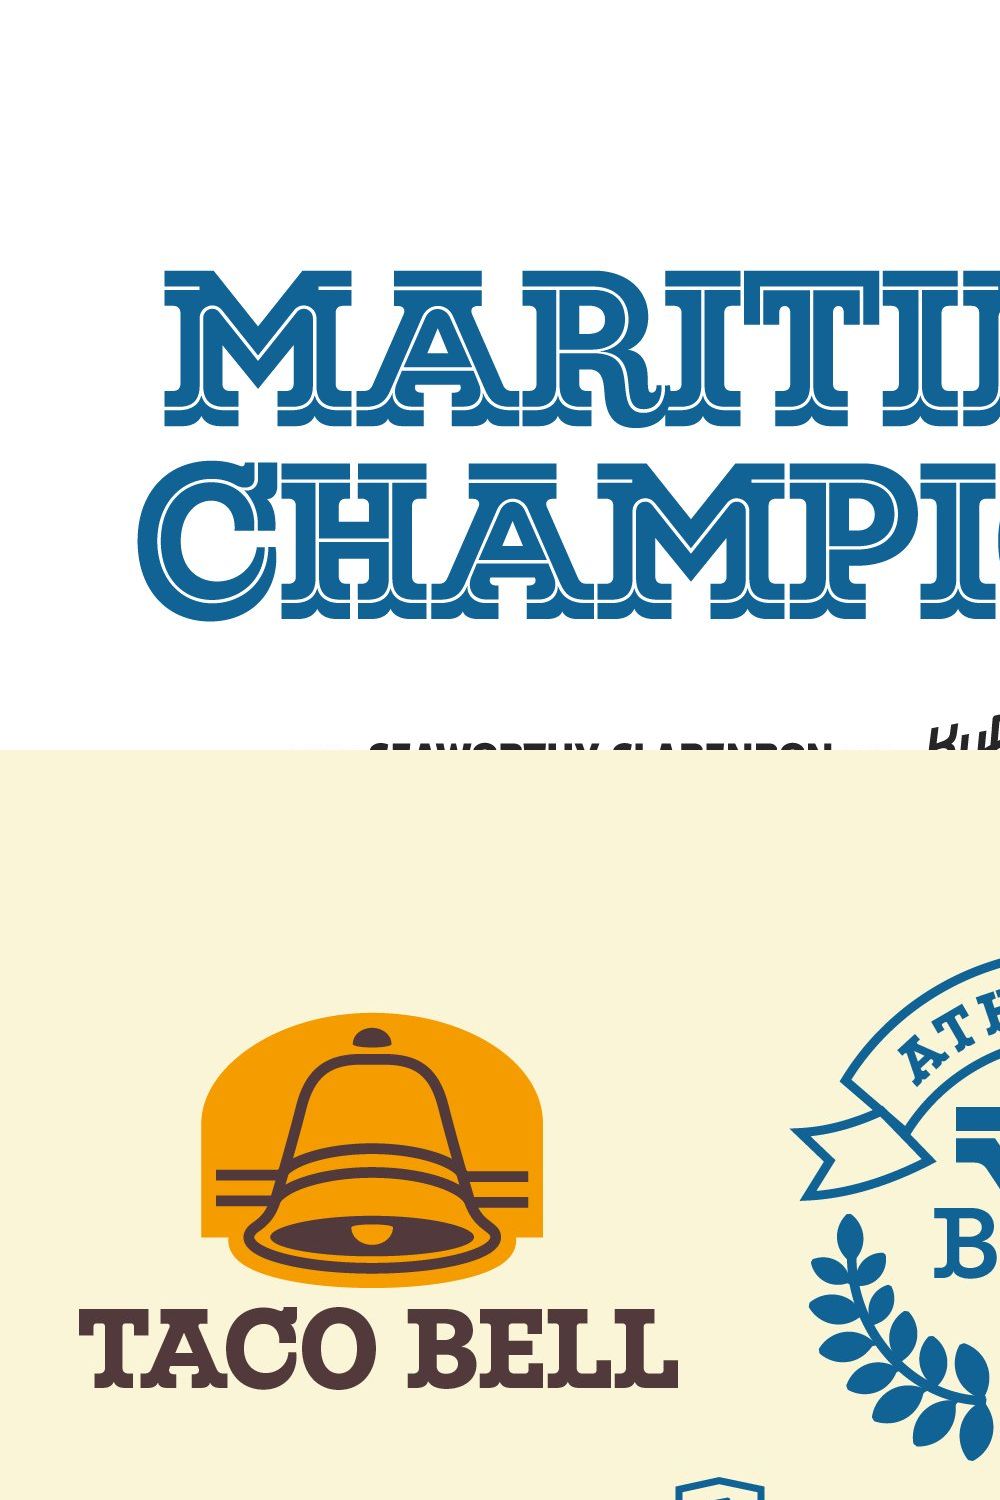 Maritime Champion pinterest preview image.